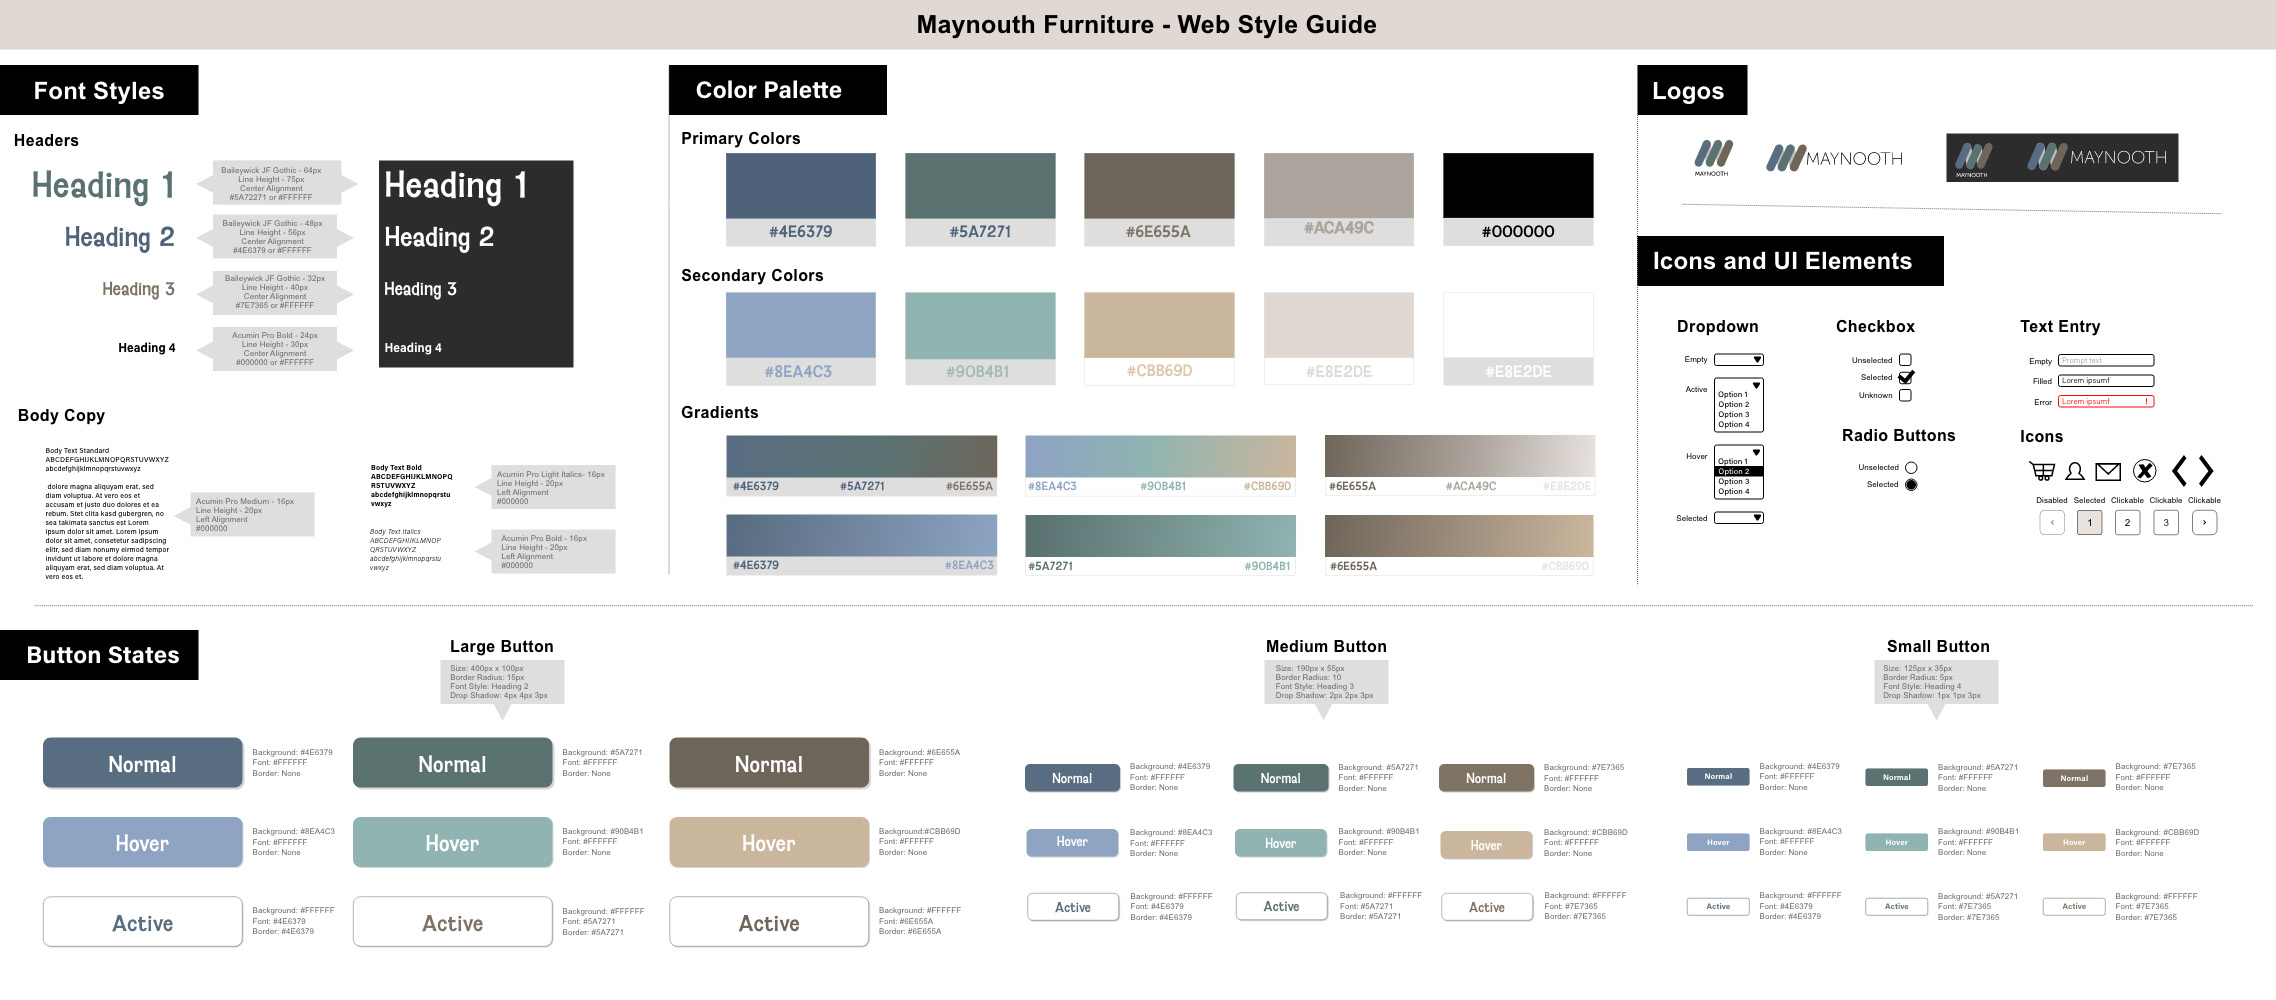 Styleguide with font styles, color palette, logos, icons and UI elements, and button states.